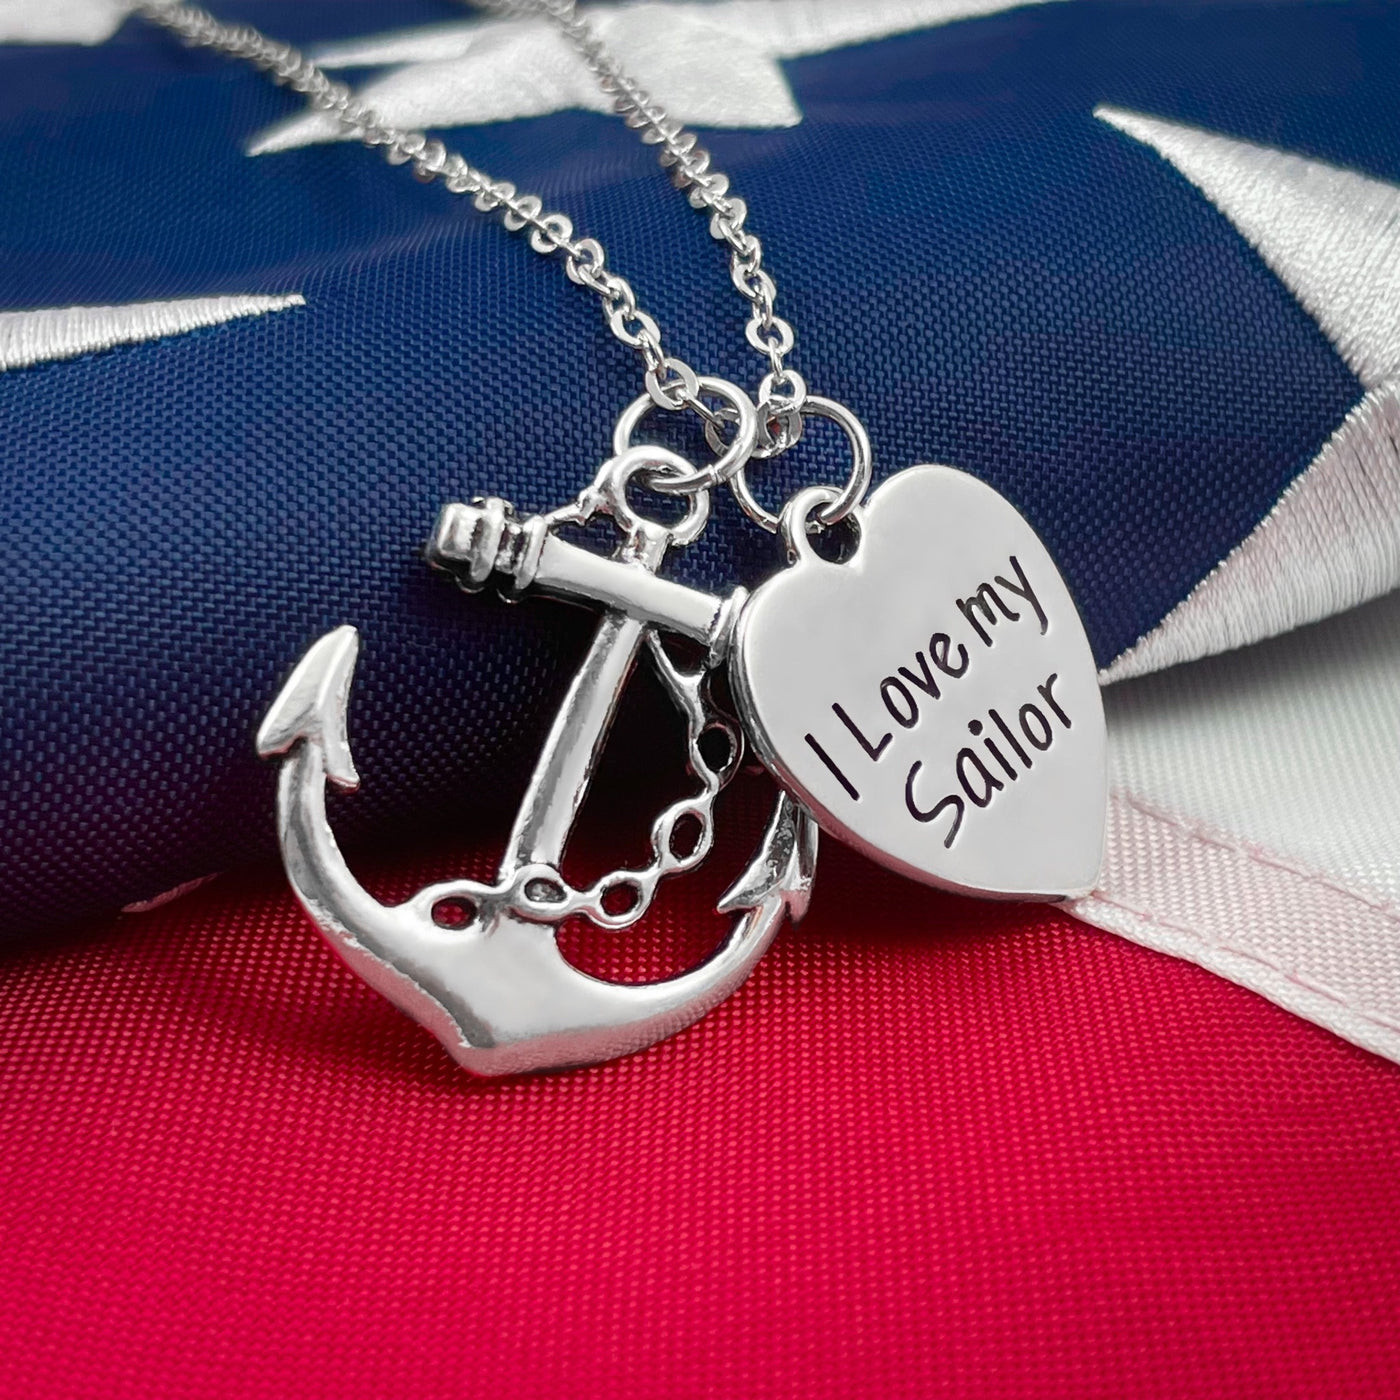 I Love My Sailor Necklace